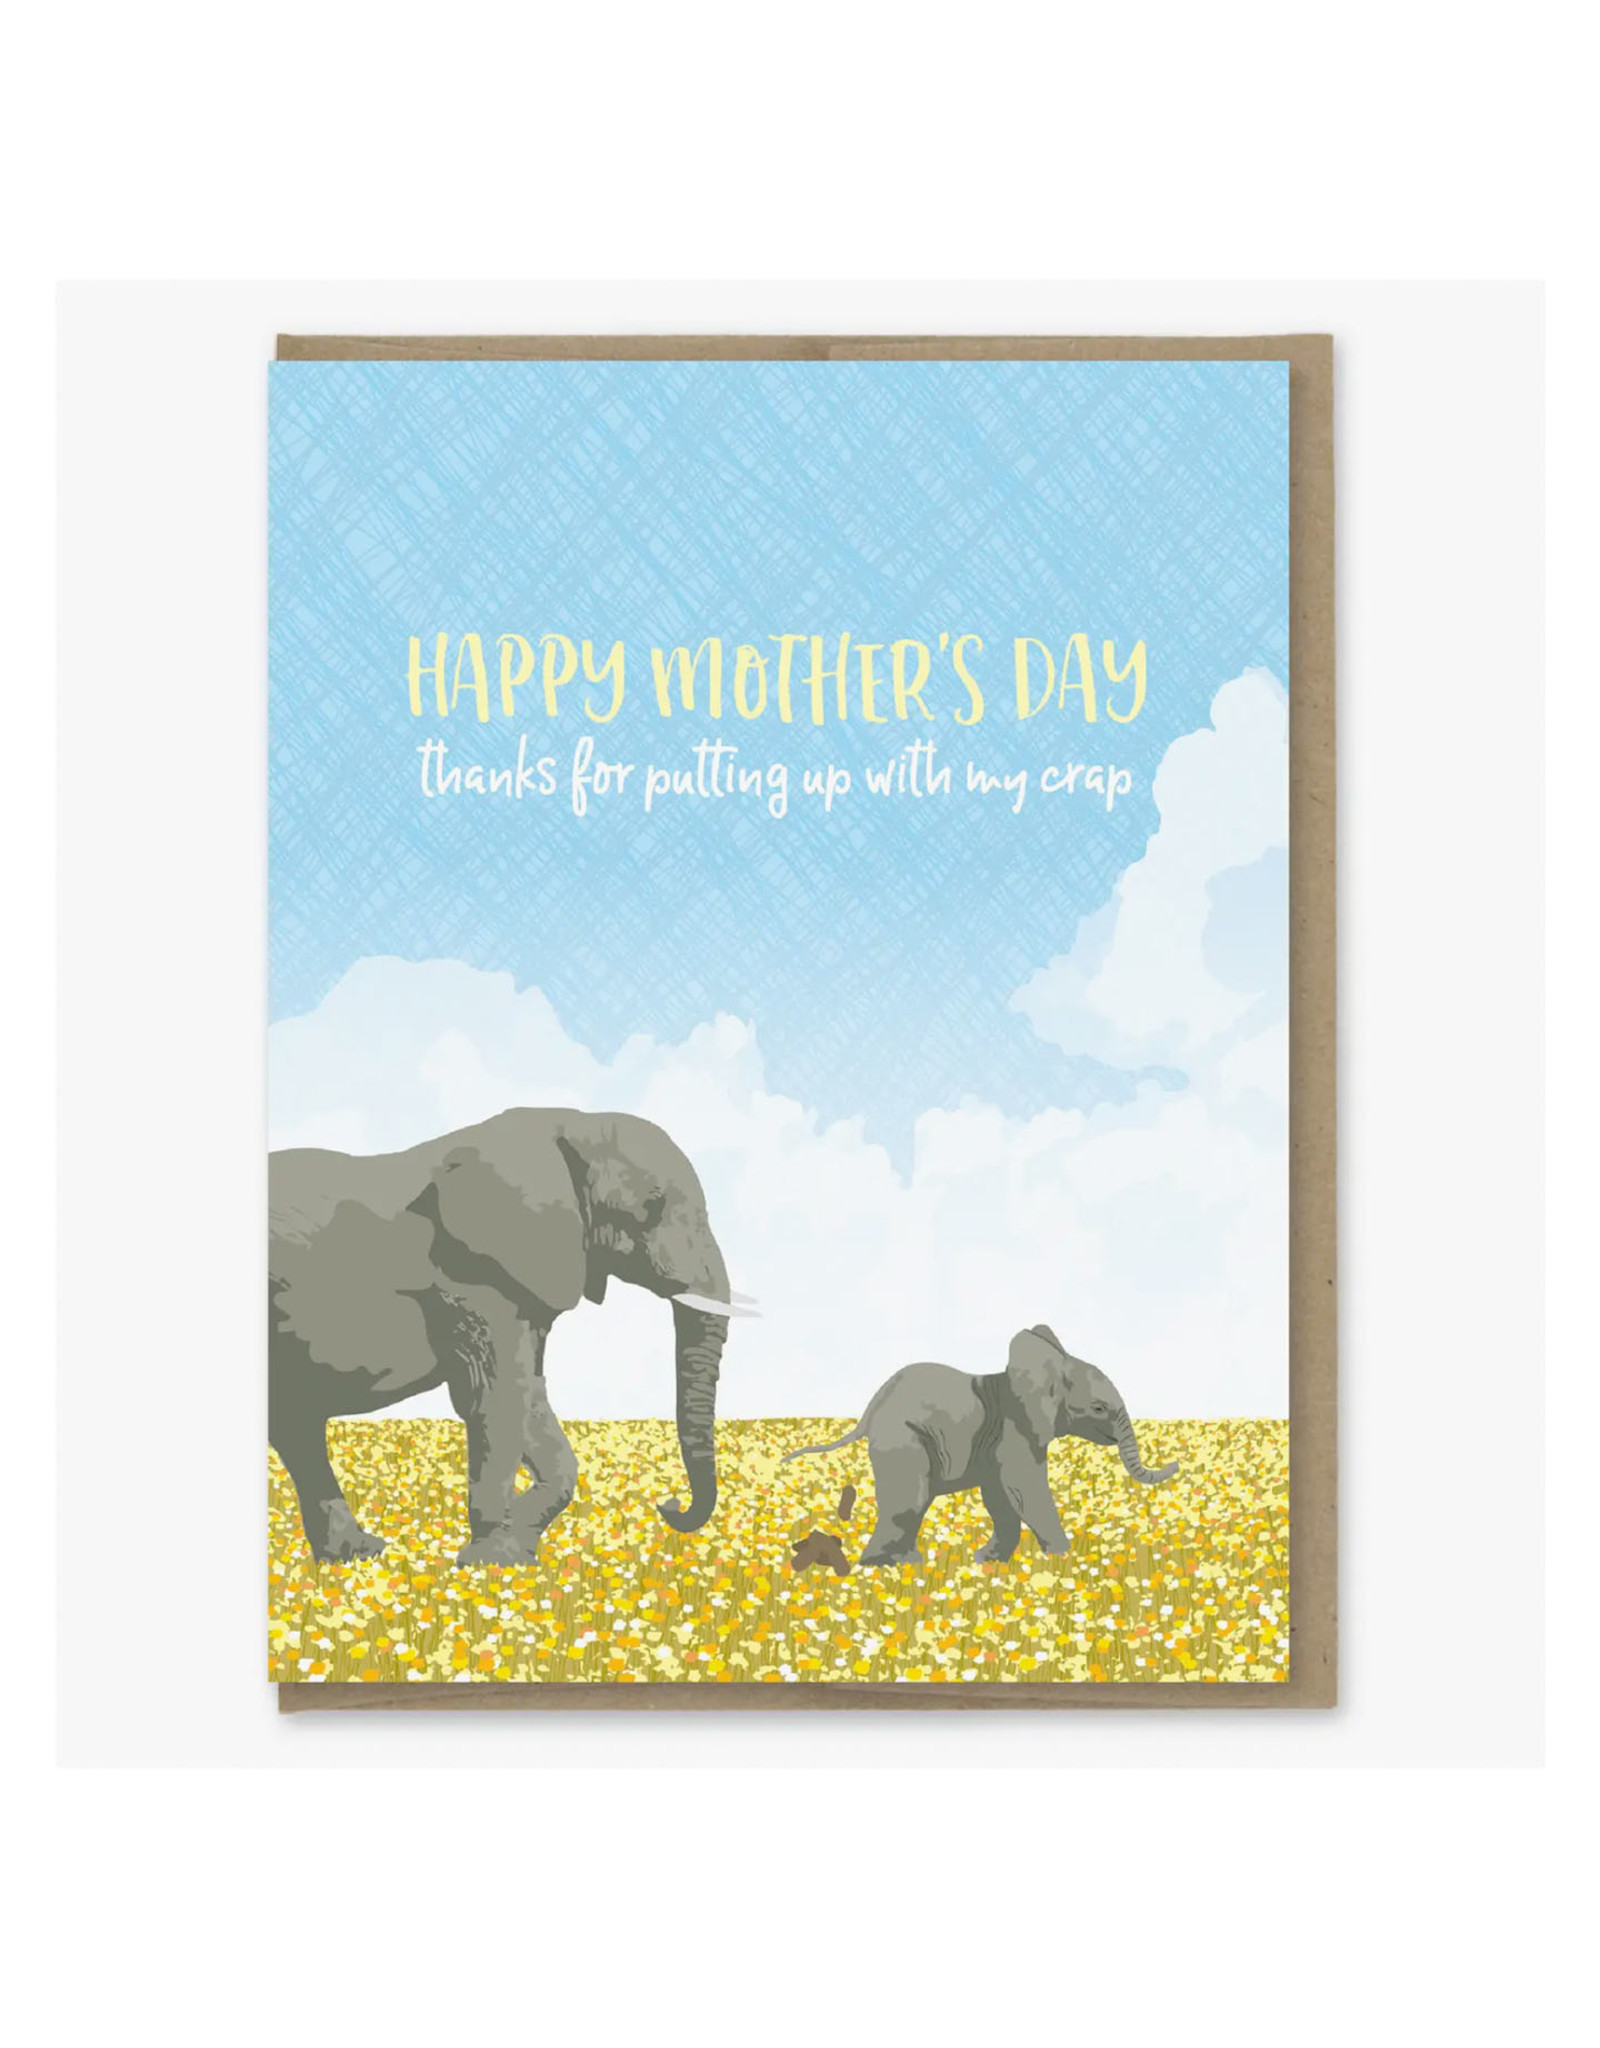 Putting Up With Crap Mom Elephant Greeting Card